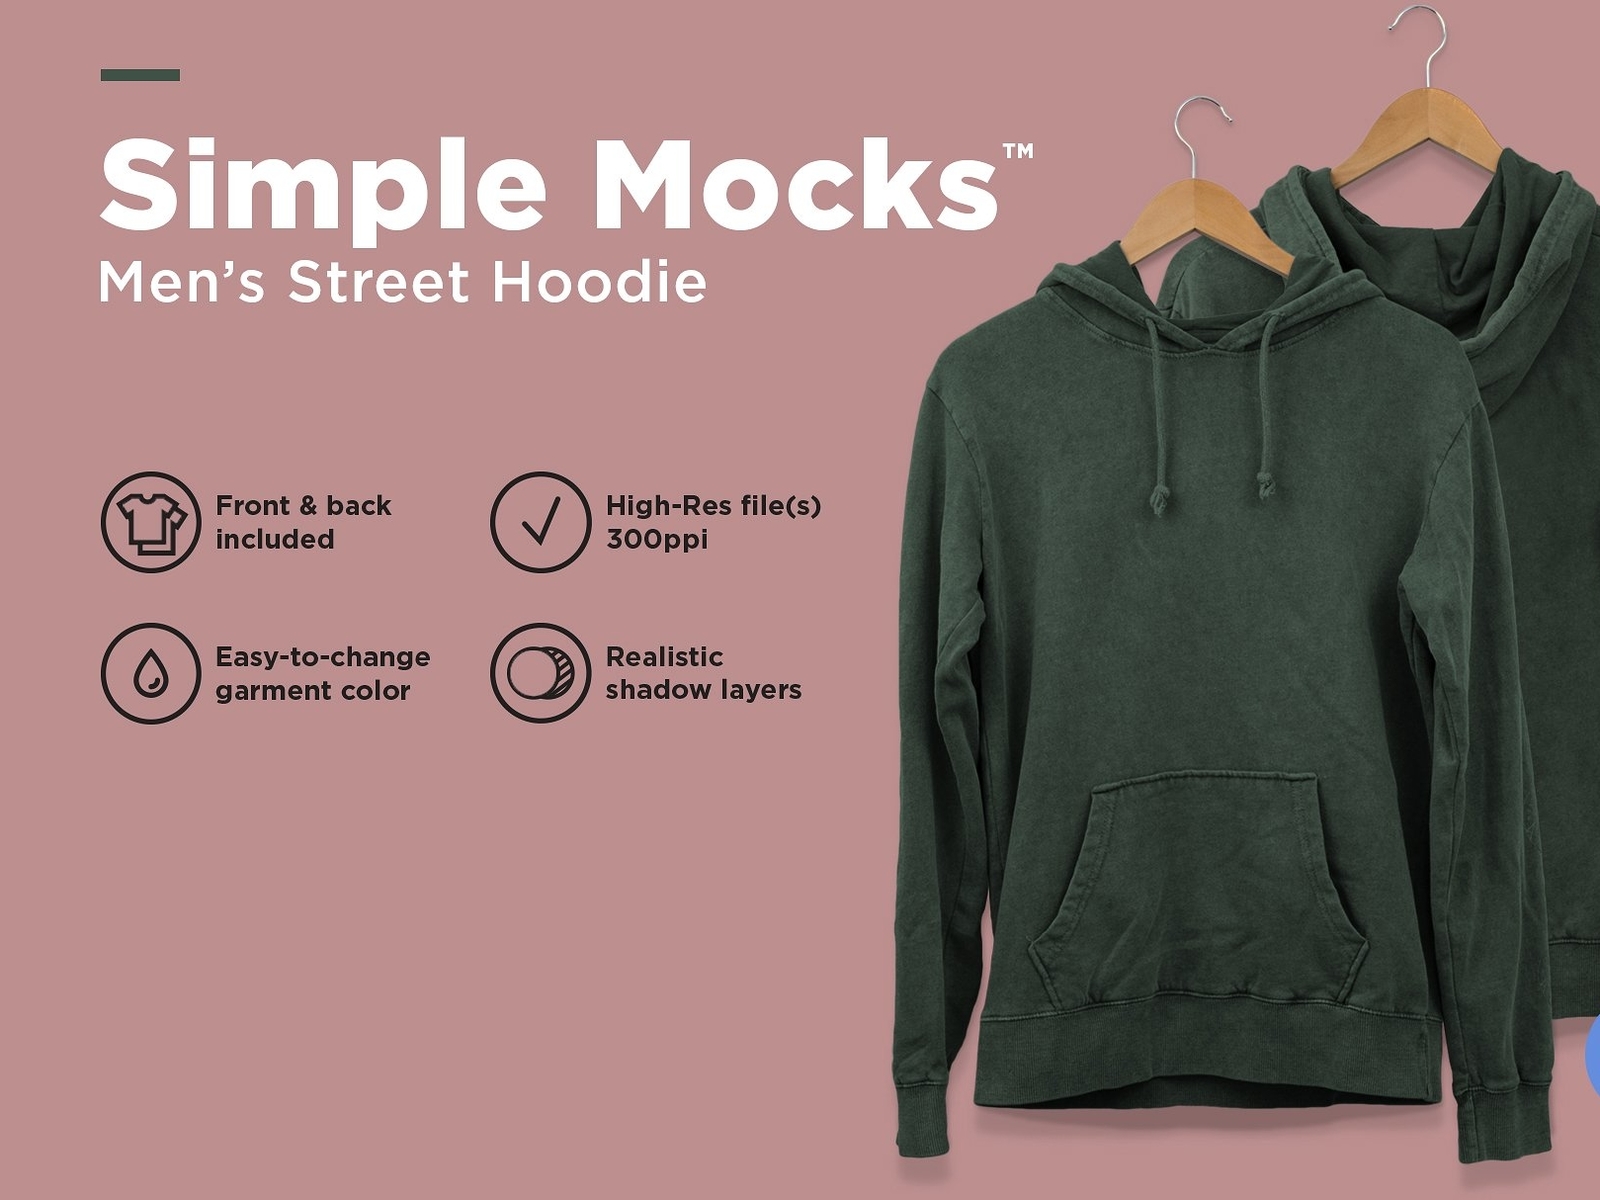 Men S Street Hoodie Mockup By Michael Hoss On Dribbble Images, Photos, Reviews